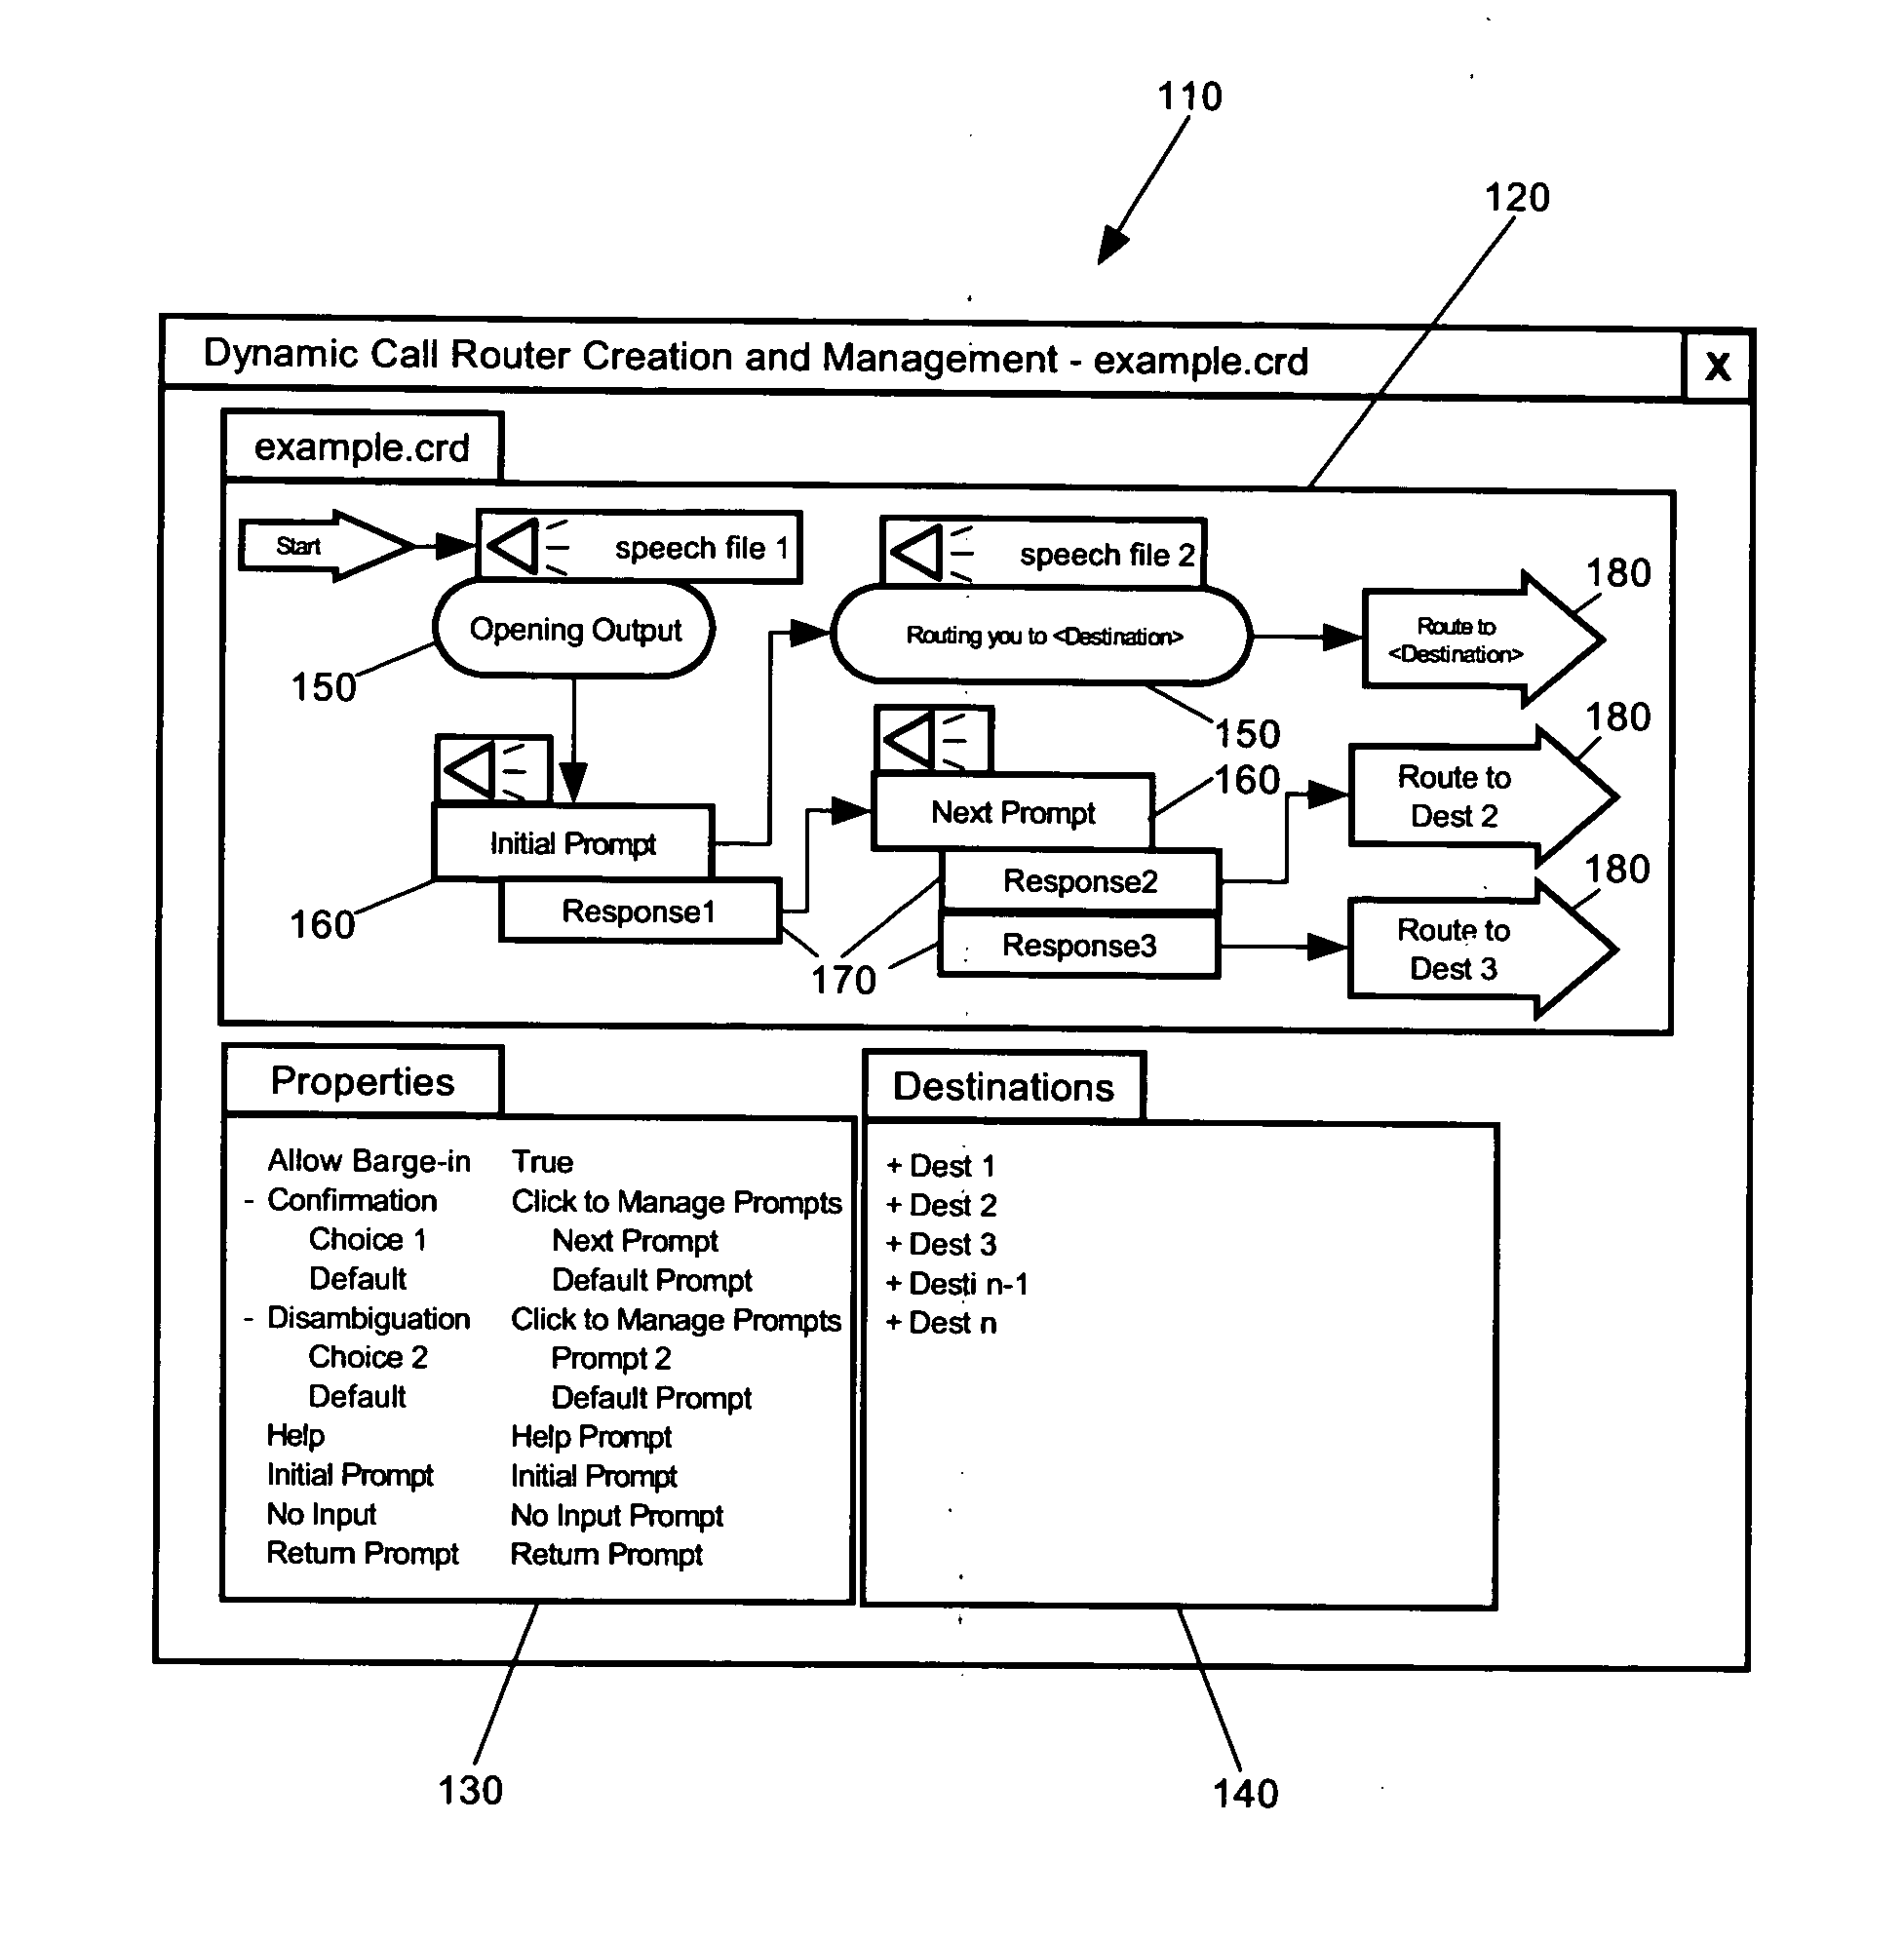 Graphical tool for creating a call routing application